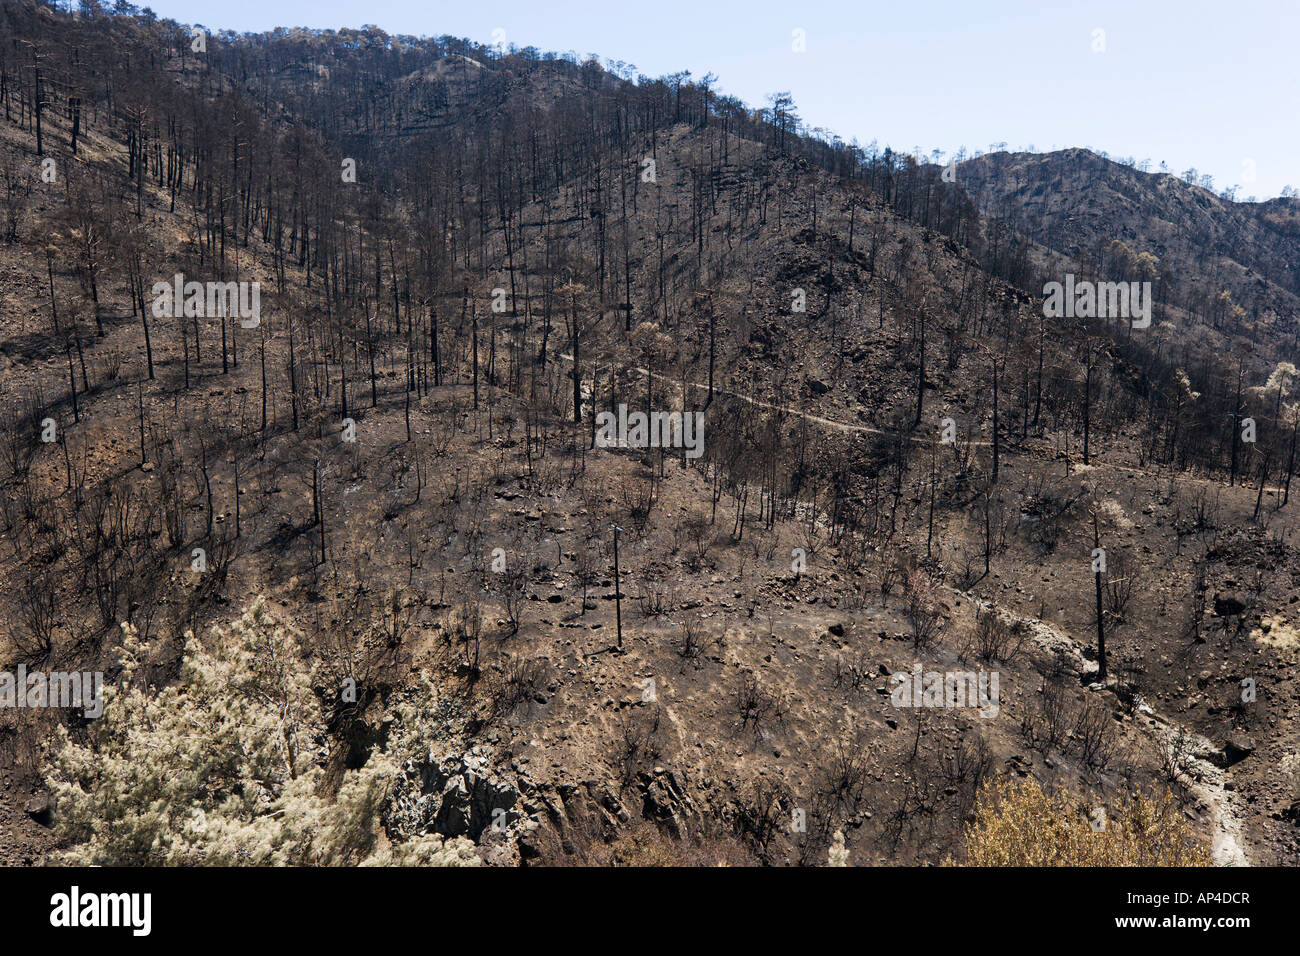 Damage after Forest Fire, Troodos Mountains, Cyprus Stock Photo